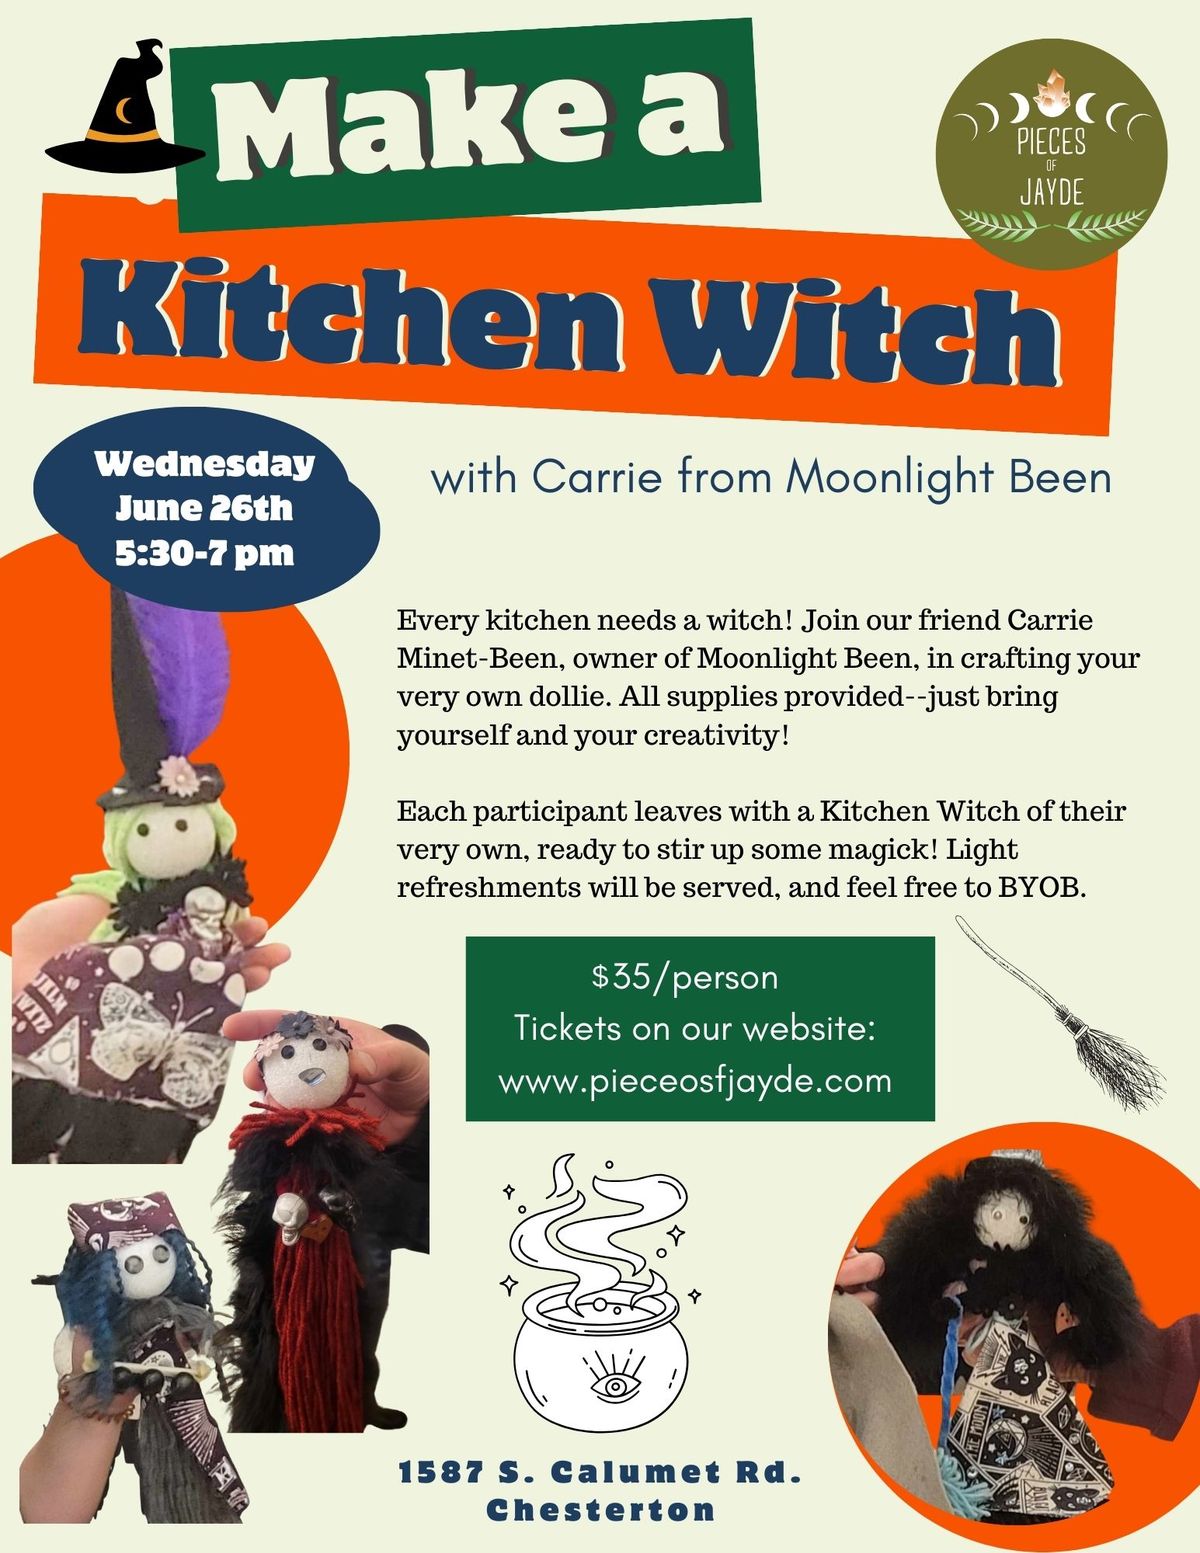 Make a Kitchen Witch with Moonlight Been